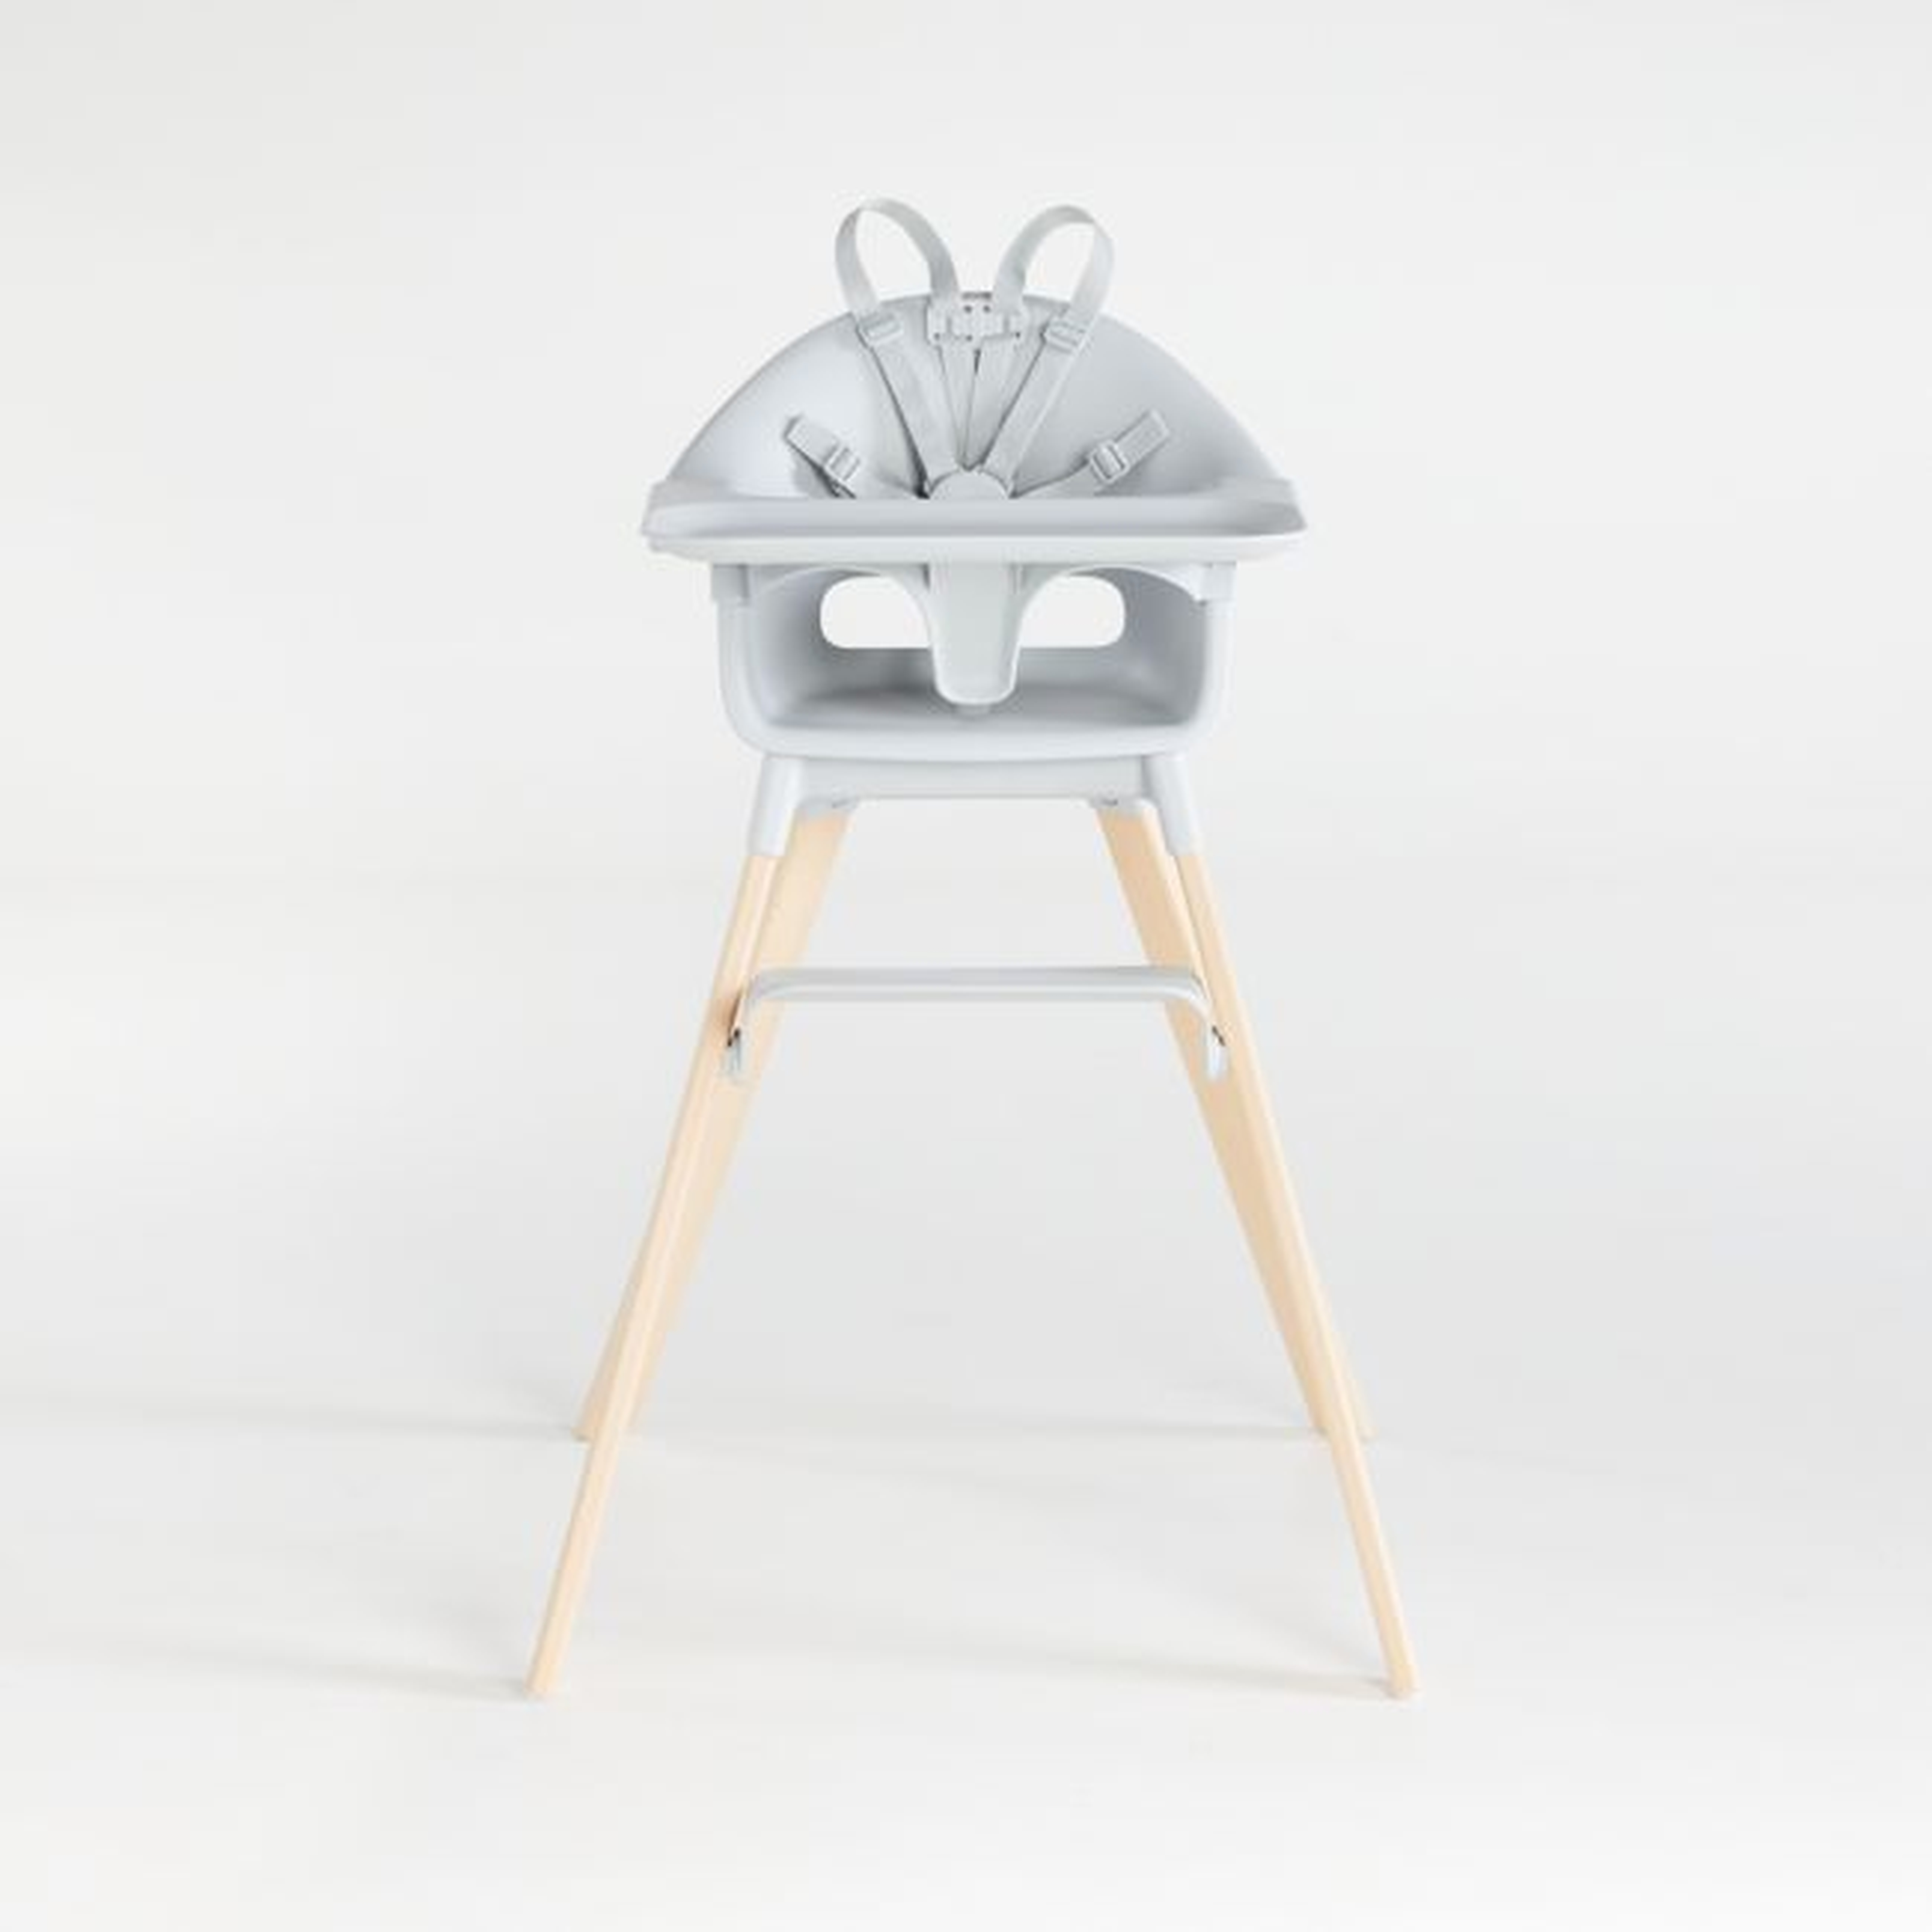 Stokke Clikk Grey Baby High Chair with Adjustable Footrest - Crate and Barrel